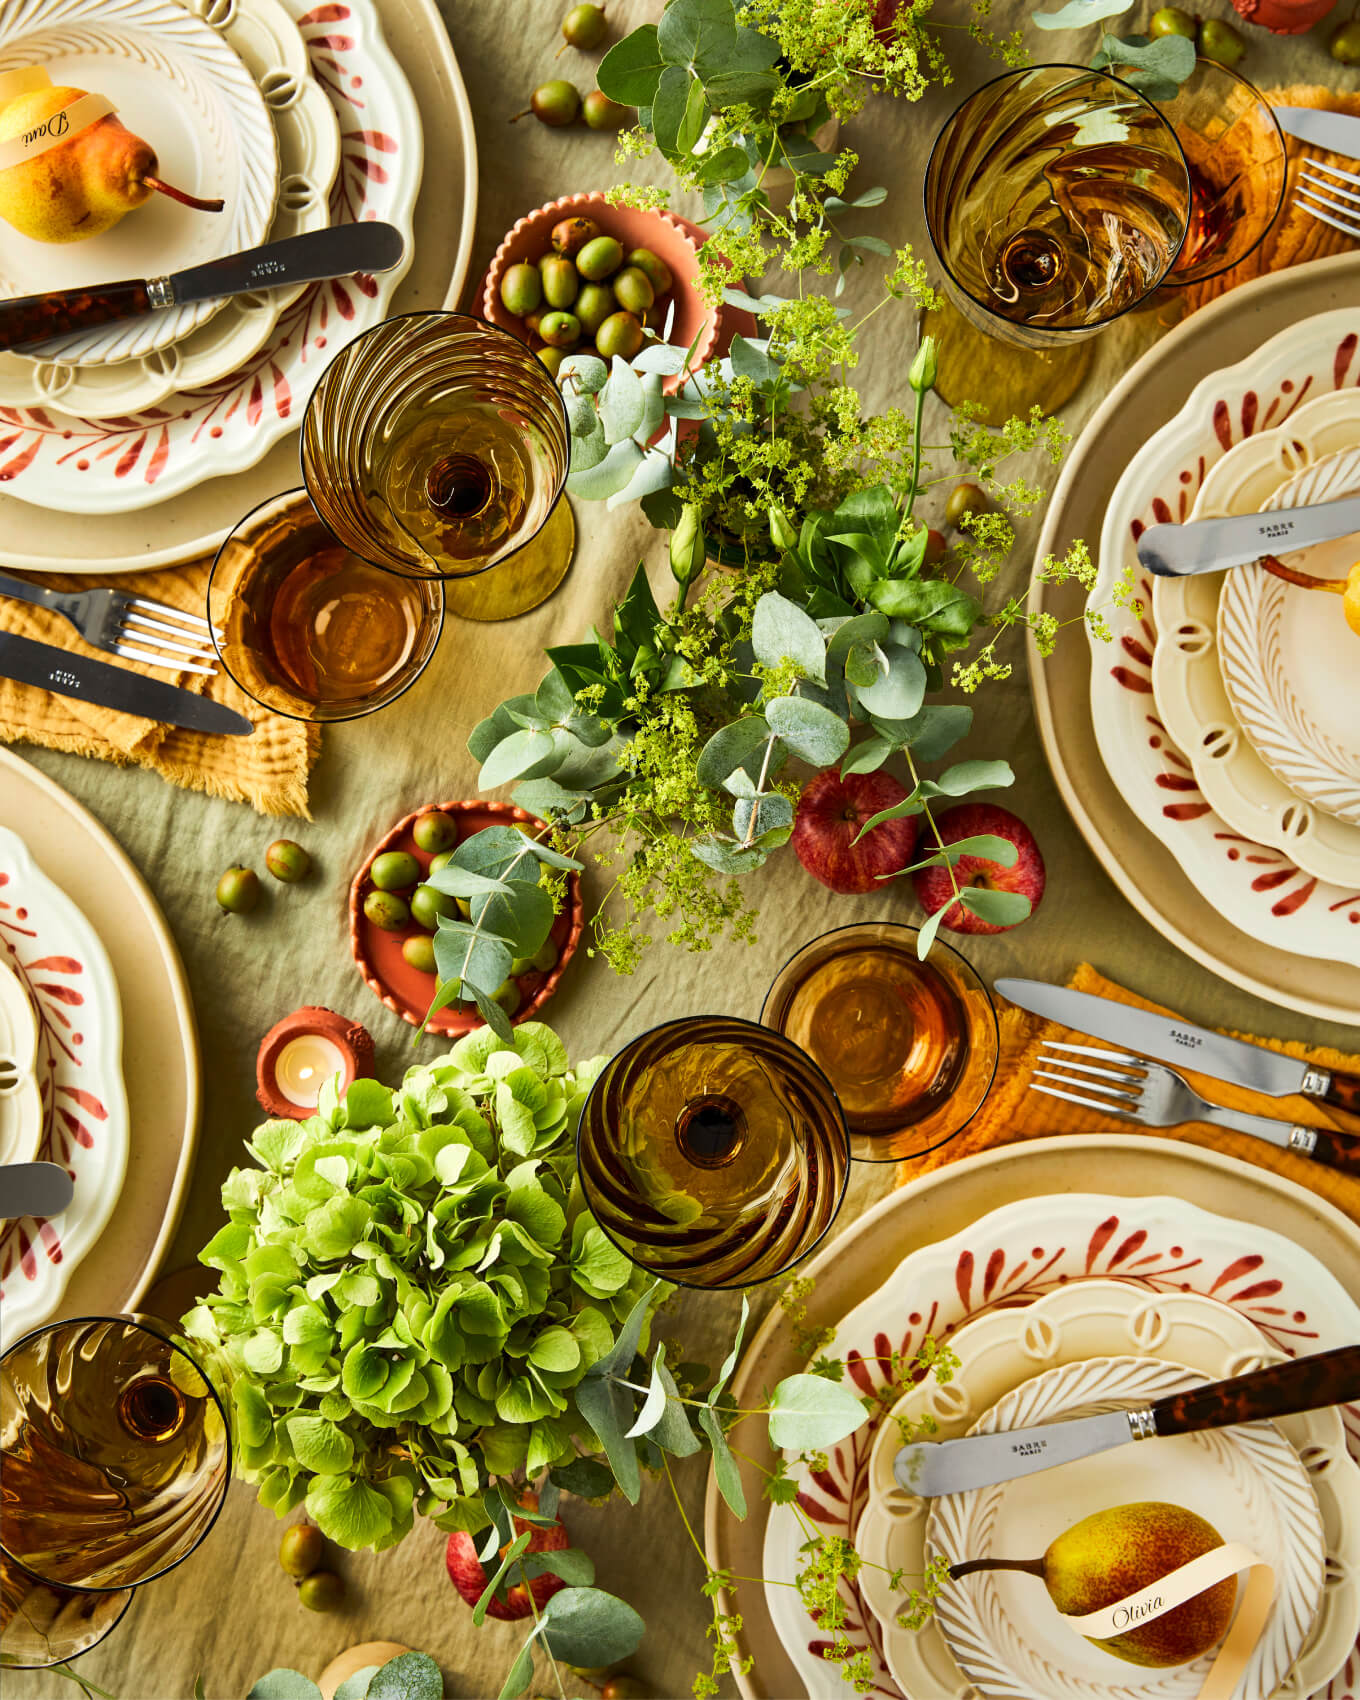 Autumnal centrepiece with green, orange, brown and rustic glasses and crockery